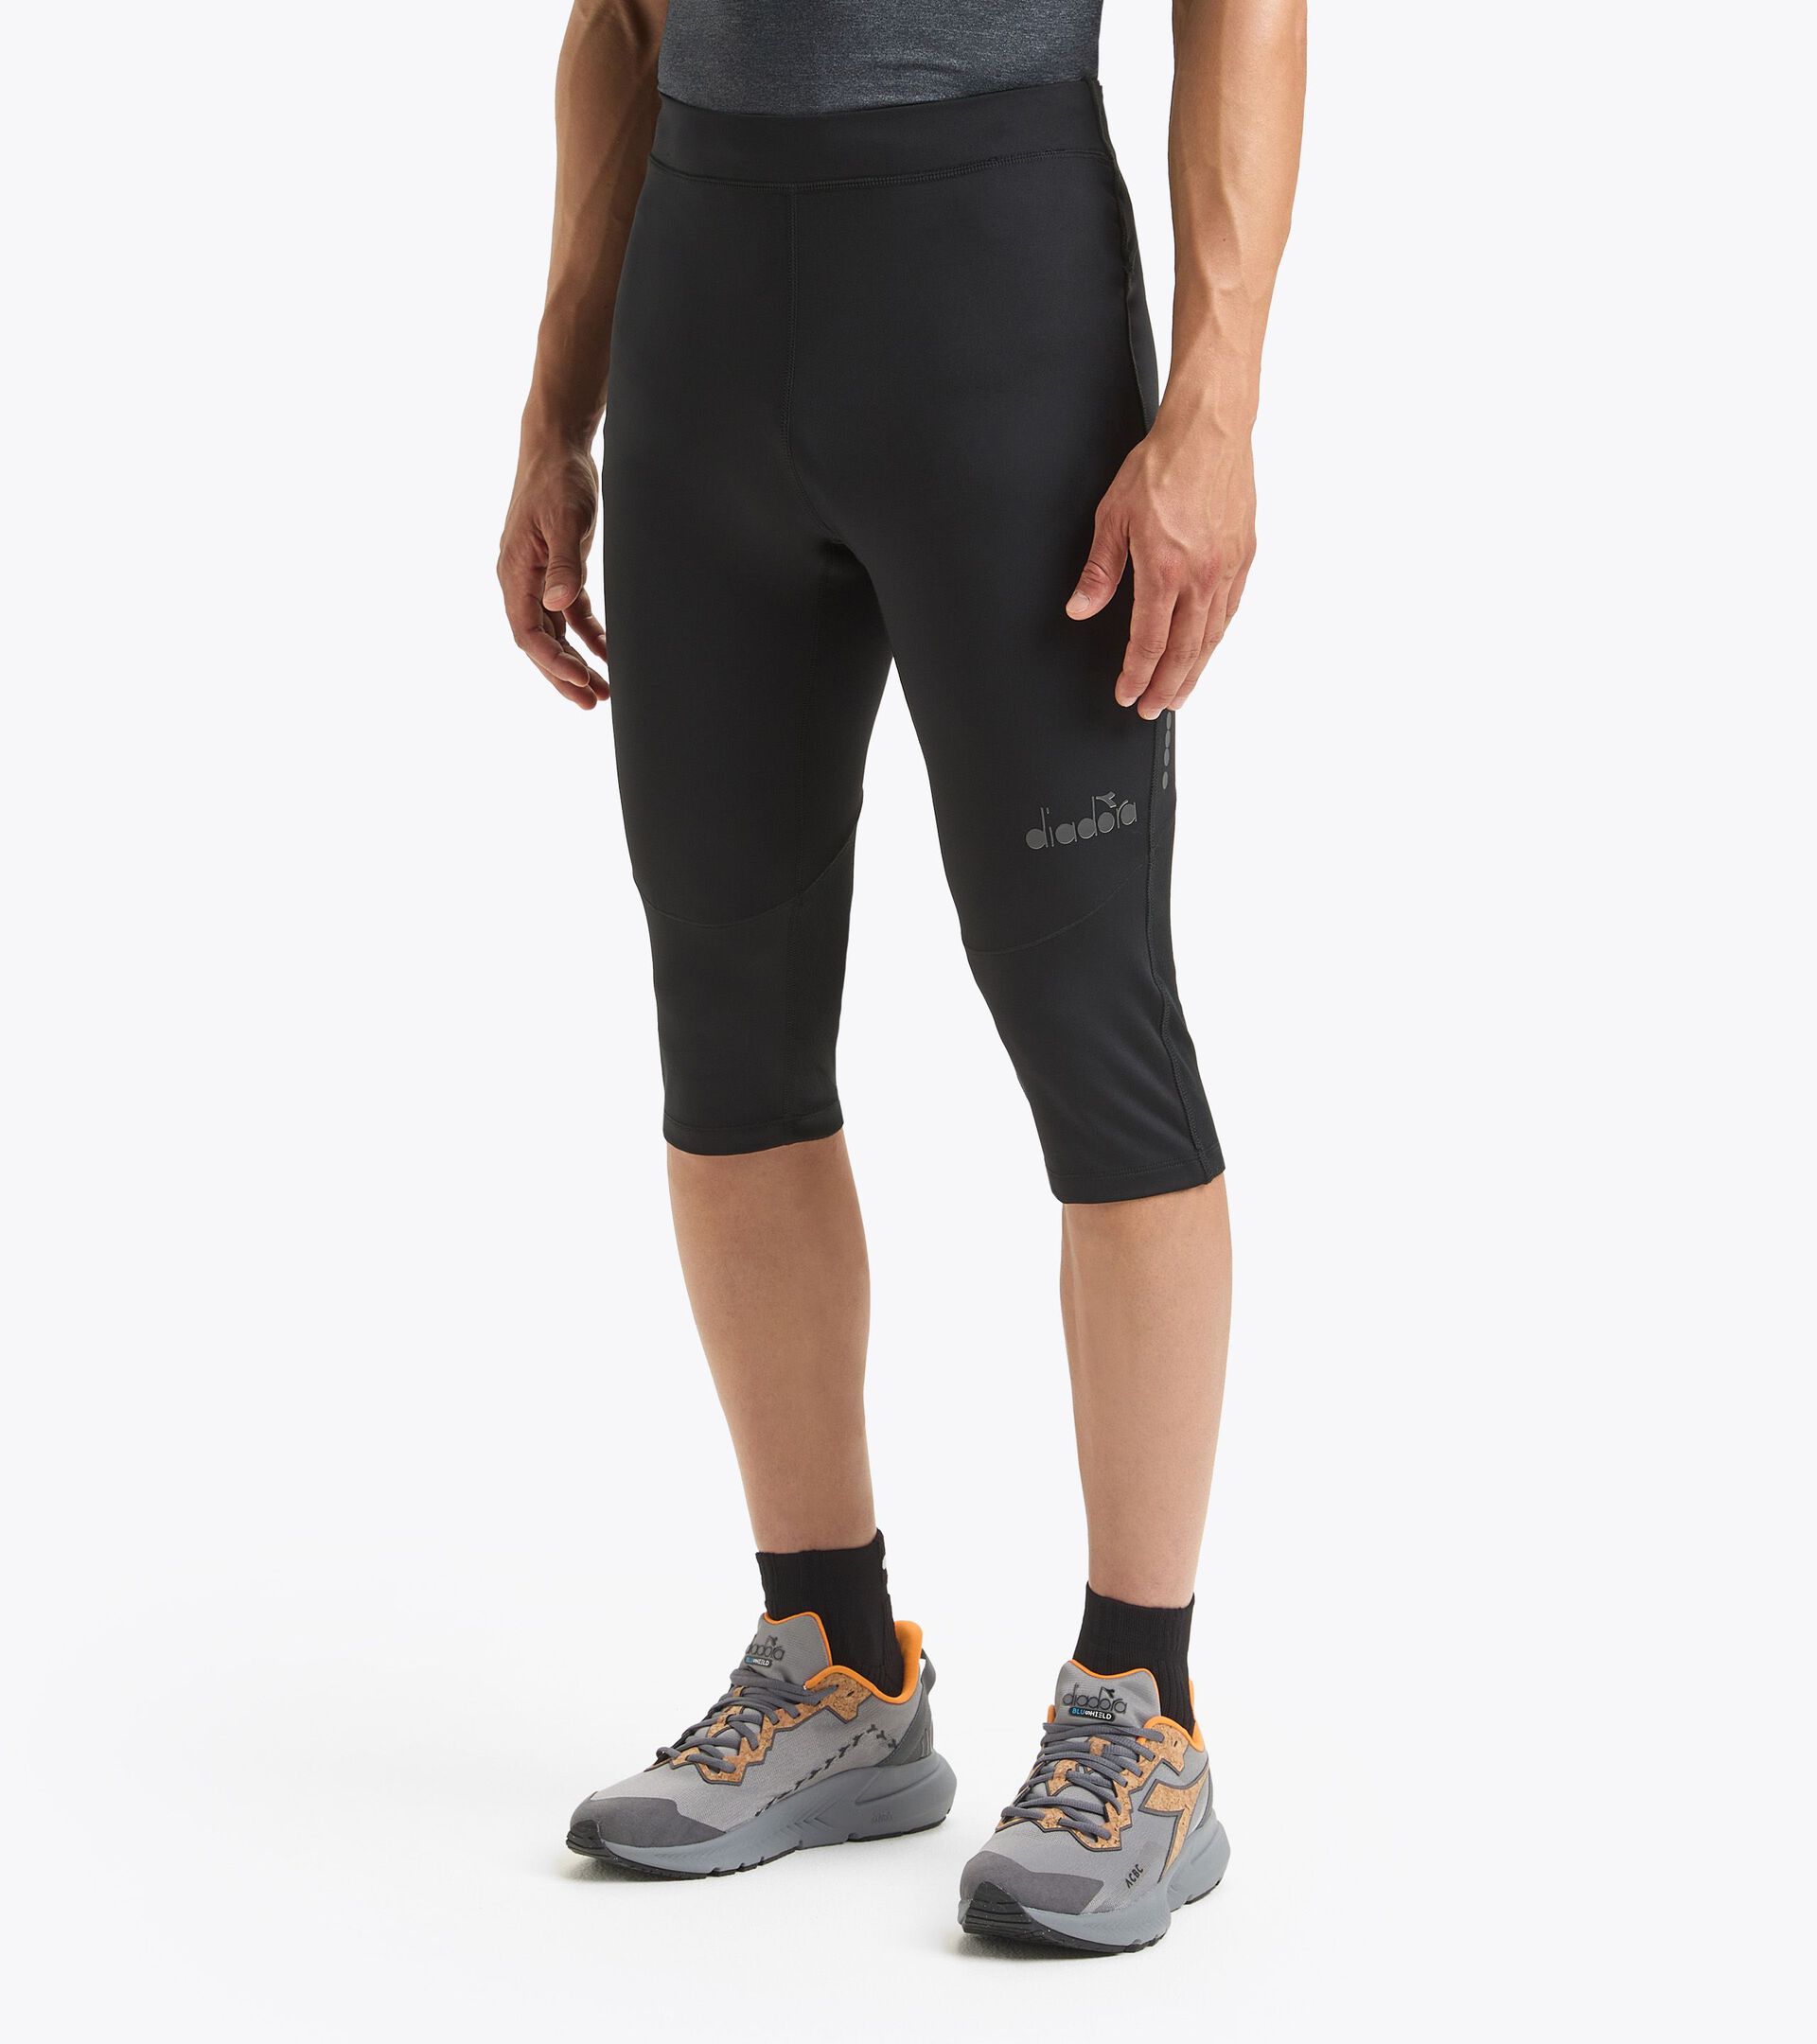 Men's Running Shorts, Tights and Trousers